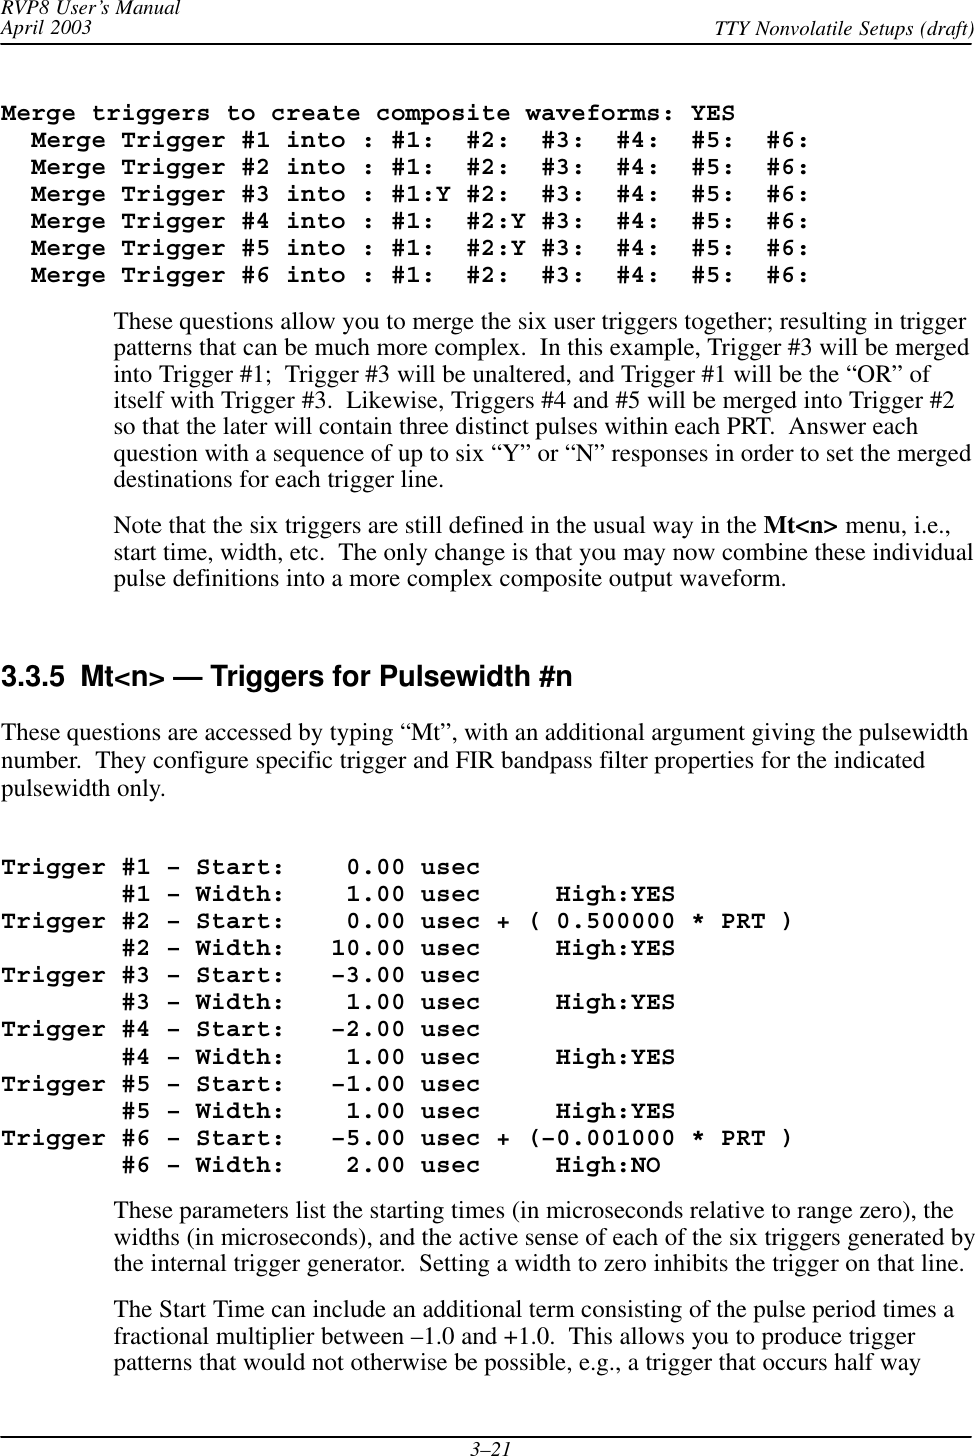 RVP8 User’s ManualApril 2003 TTY Nonvolatile Setups (draft)3–21Merge triggers to create composite waveforms: YES  Merge Trigger #1 into : #1:  #2:  #3:  #4:  #5:  #6:  Merge Trigger #2 into : #1:  #2:  #3:  #4:  #5:  #6:  Merge Trigger #3 into : #1:Y #2:  #3:  #4:  #5:  #6:  Merge Trigger #4 into : #1:  #2:Y #3:  #4:  #5:  #6:  Merge Trigger #5 into : #1:  #2:Y #3:  #4:  #5:  #6:  Merge Trigger #6 into : #1:  #2:  #3:  #4:  #5:  #6:These questions allow you to merge the six user triggers together; resulting in triggerpatterns that can be much more complex.  In this example, Trigger #3 will be mergedinto Trigger #1;  Trigger #3 will be unaltered, and Trigger #1 will be the “OR” ofitself with Trigger #3.  Likewise, Triggers #4 and #5 will be merged into Trigger #2so that the later will contain three distinct pulses within each PRT.  Answer eachquestion with a sequence of up to six “Y” or “N” responses in order to set the mergeddestinations for each trigger line.Note that the six triggers are still defined in the usual way in the Mt&lt;n&gt; menu, i.e.,start time, width, etc.  The only change is that you may now combine these individualpulse definitions into a more complex composite output waveform.3.3.5  Mt&lt;n&gt; — Triggers for Pulsewidth #nThese questions are accessed by typing “Mt”, with an additional argument giving the pulsewidthnumber.  They configure specific trigger and FIR bandpass filter properties for the indicatedpulsewidth only.Trigger #1 – Start:    0.00 usec        #1 – Width:    1.00 usec     High:YESTrigger #2 – Start:    0.00 usec + ( 0.500000 * PRT )        #2 – Width:   10.00 usec     High:YESTrigger #3 – Start:   –3.00 usec        #3 – Width:    1.00 usec     High:YESTrigger #4 – Start:   –2.00 usec        #4 – Width:    1.00 usec     High:YESTrigger #5 – Start:   –1.00 usec        #5 – Width:    1.00 usec     High:YESTrigger #6 – Start:   –5.00 usec + (–0.001000 * PRT )        #6 – Width:    2.00 usec     High:NOThese parameters list the starting times (in microseconds relative to range zero), thewidths (in microseconds), and the active sense of each of the six triggers generated bythe internal trigger generator.  Setting a width to zero inhibits the trigger on that line.The Start Time can include an additional term consisting of the pulse period times afractional multiplier between –1.0 and +1.0.  This allows you to produce triggerpatterns that would not otherwise be possible, e.g., a trigger that occurs half way